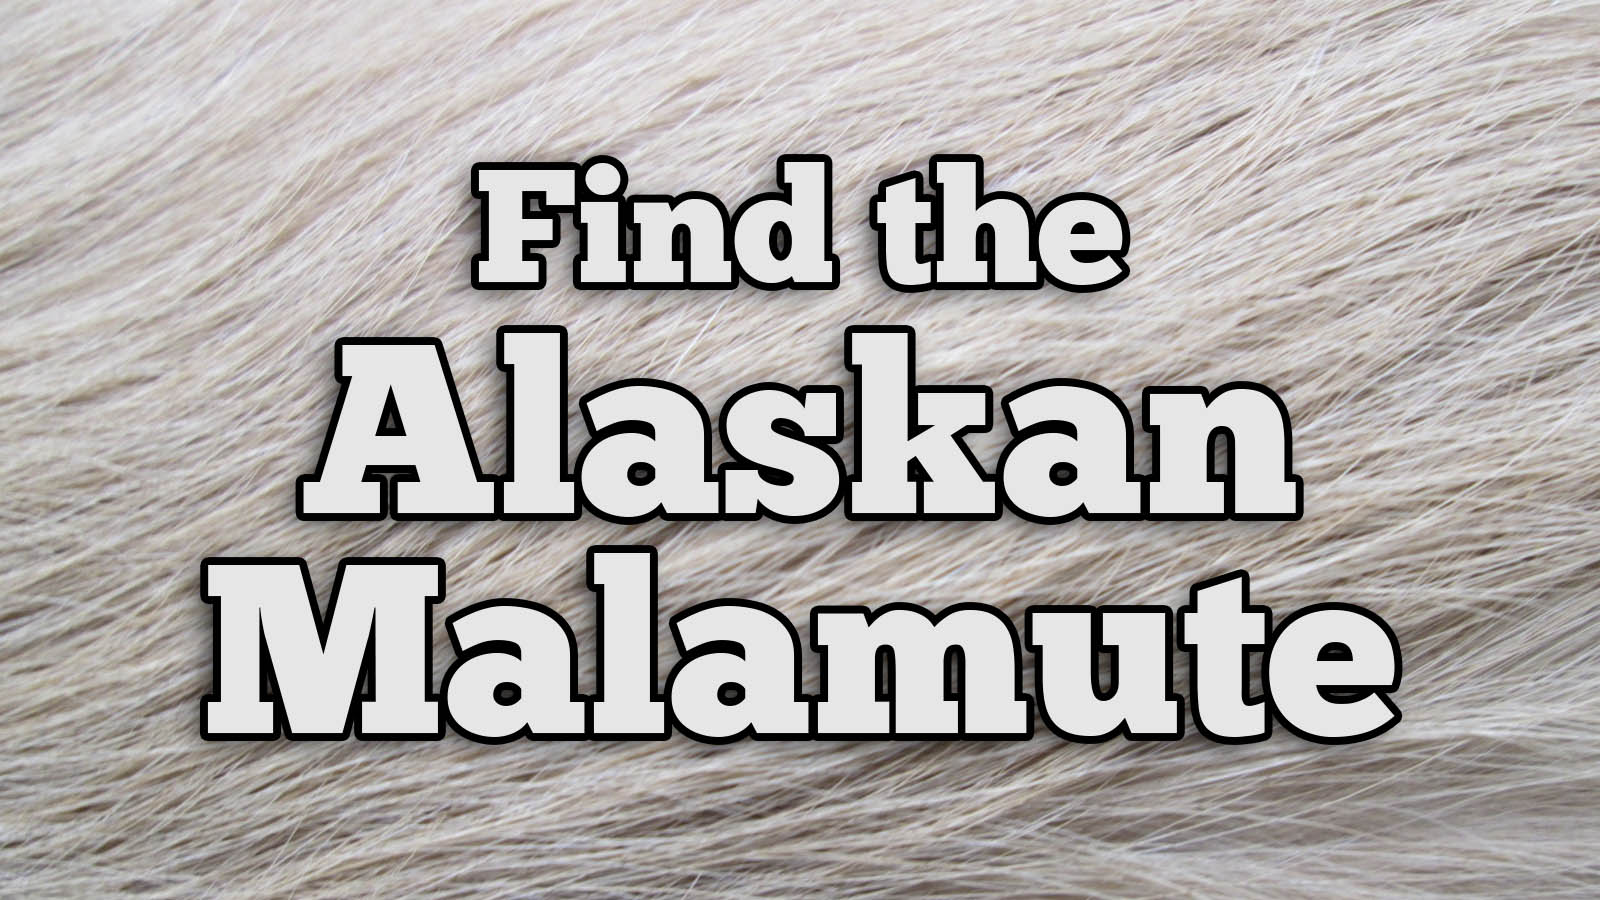 We Bet You Can’t Identify More Than 20/27 of These Dog Breeds Text Alaskan Malamute